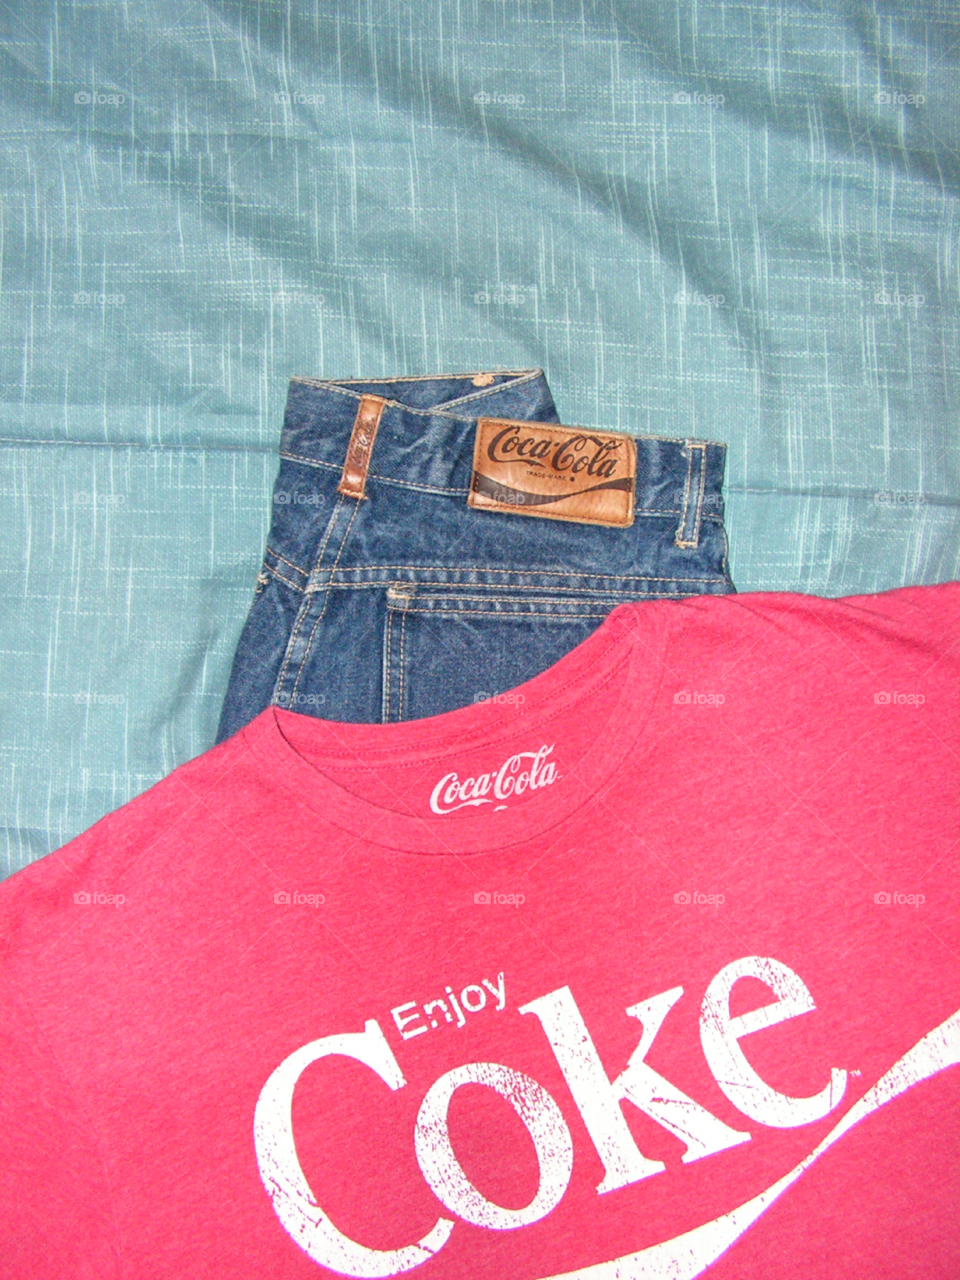 My Vintage shirt and jeans